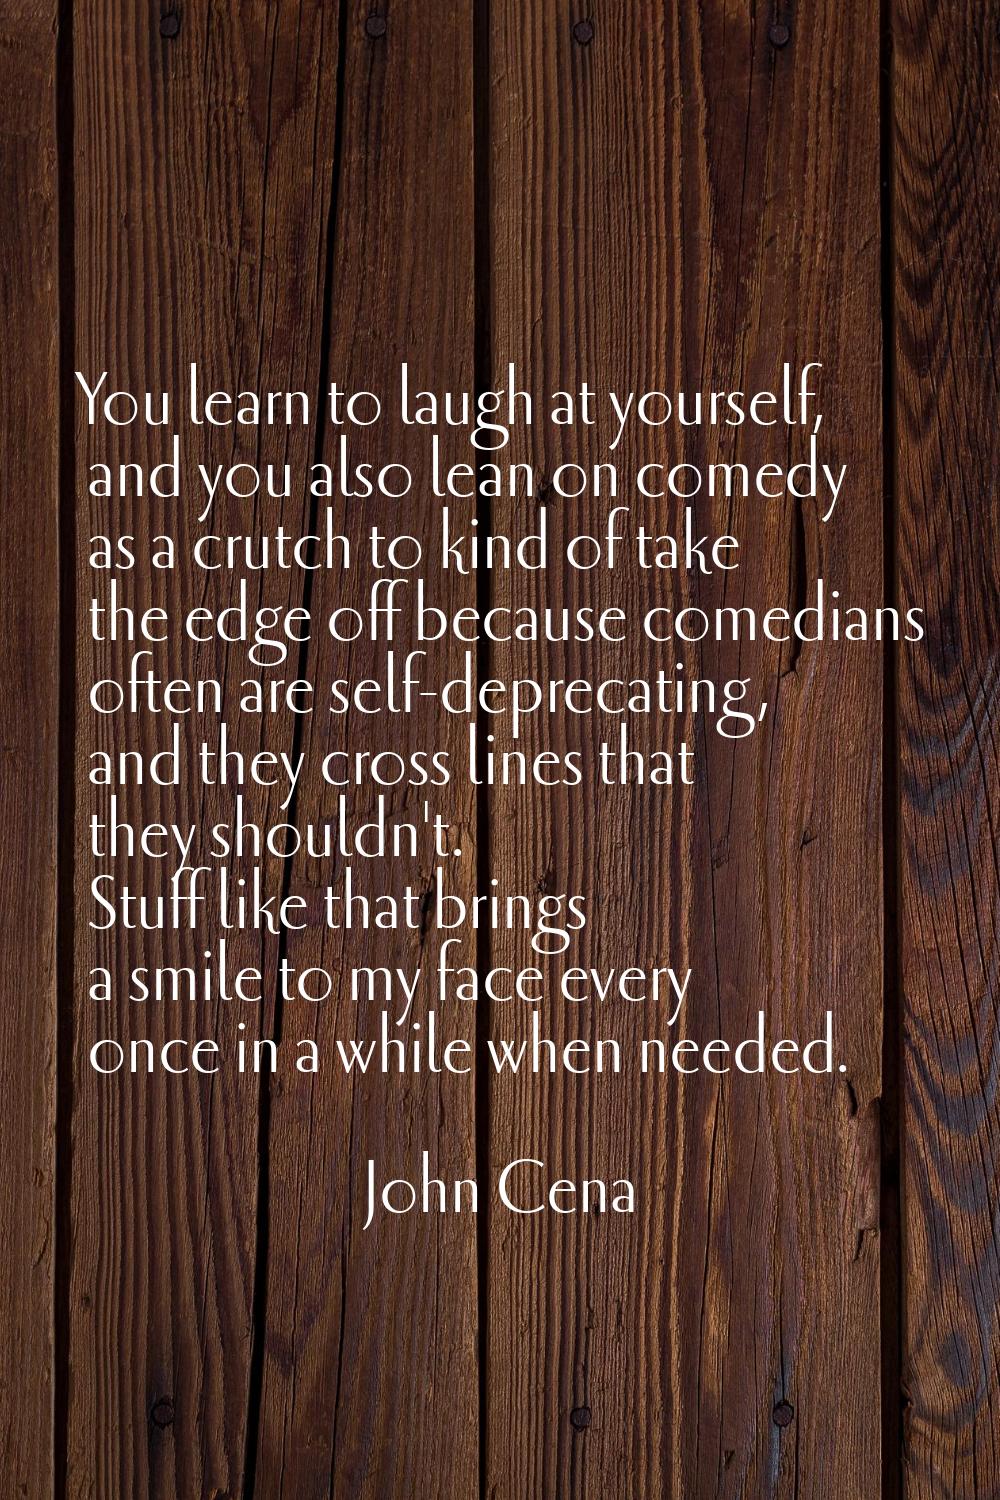 You learn to laugh at yourself, and you also lean on comedy as a crutch to kind of take the edge of